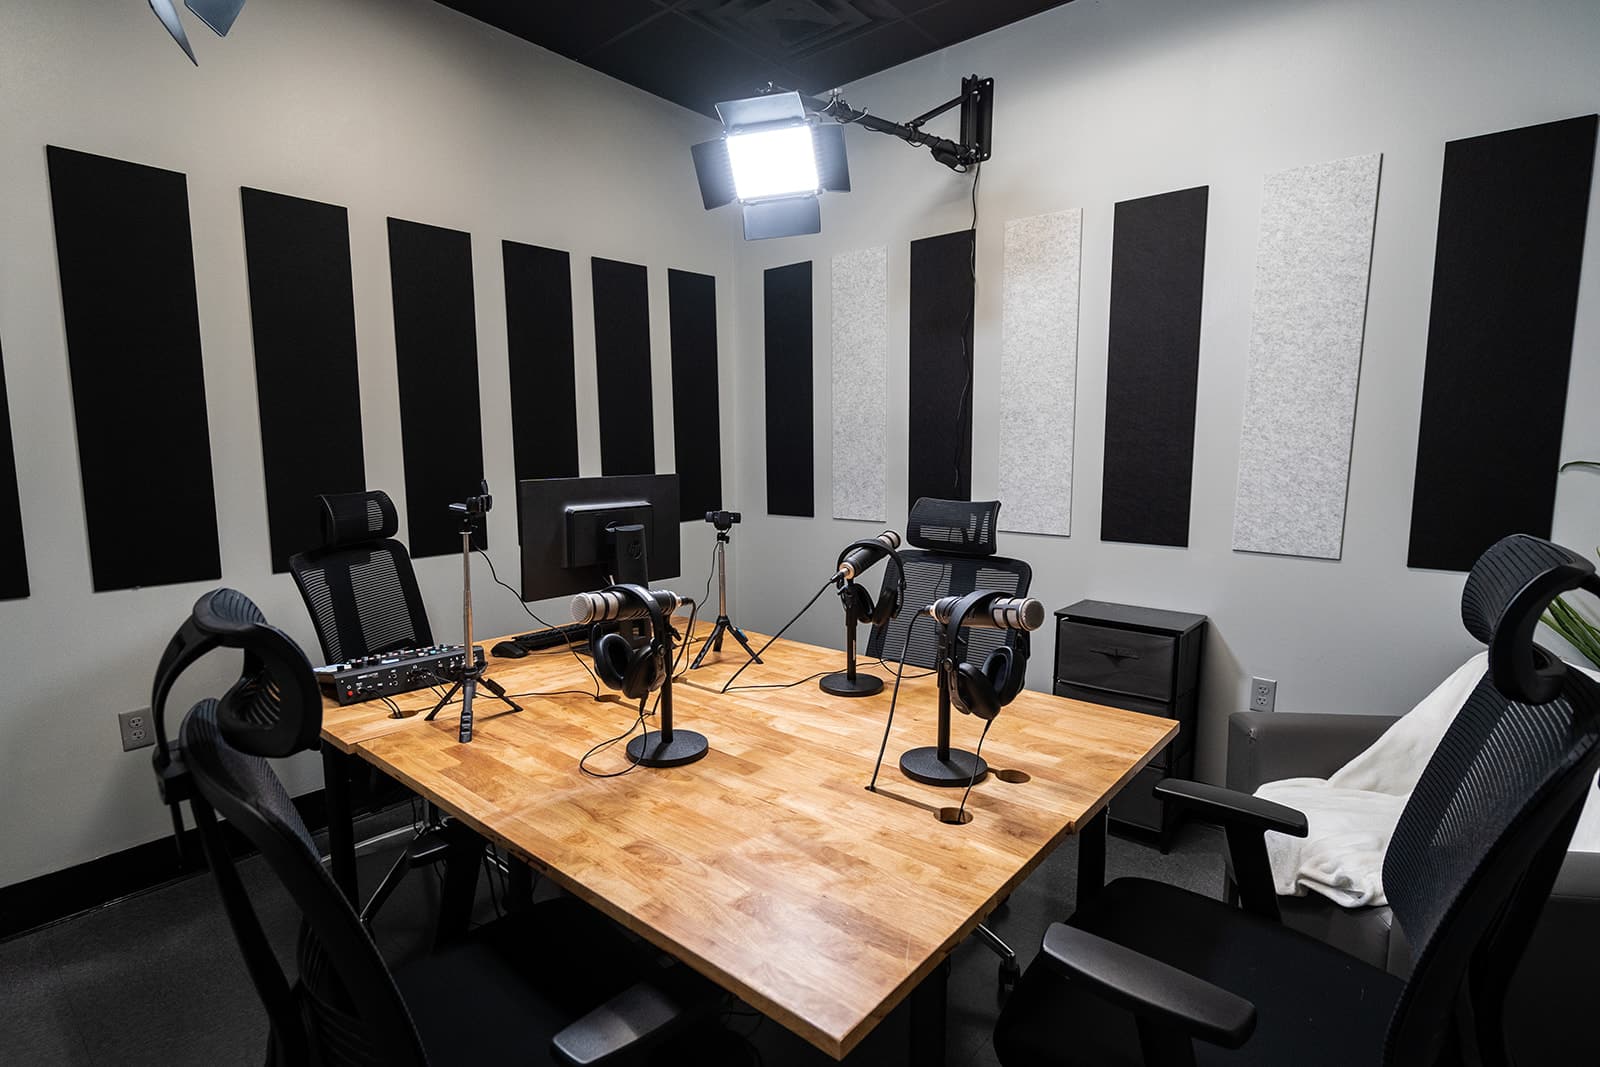 podcast room setup with microphones, cameras, and lights